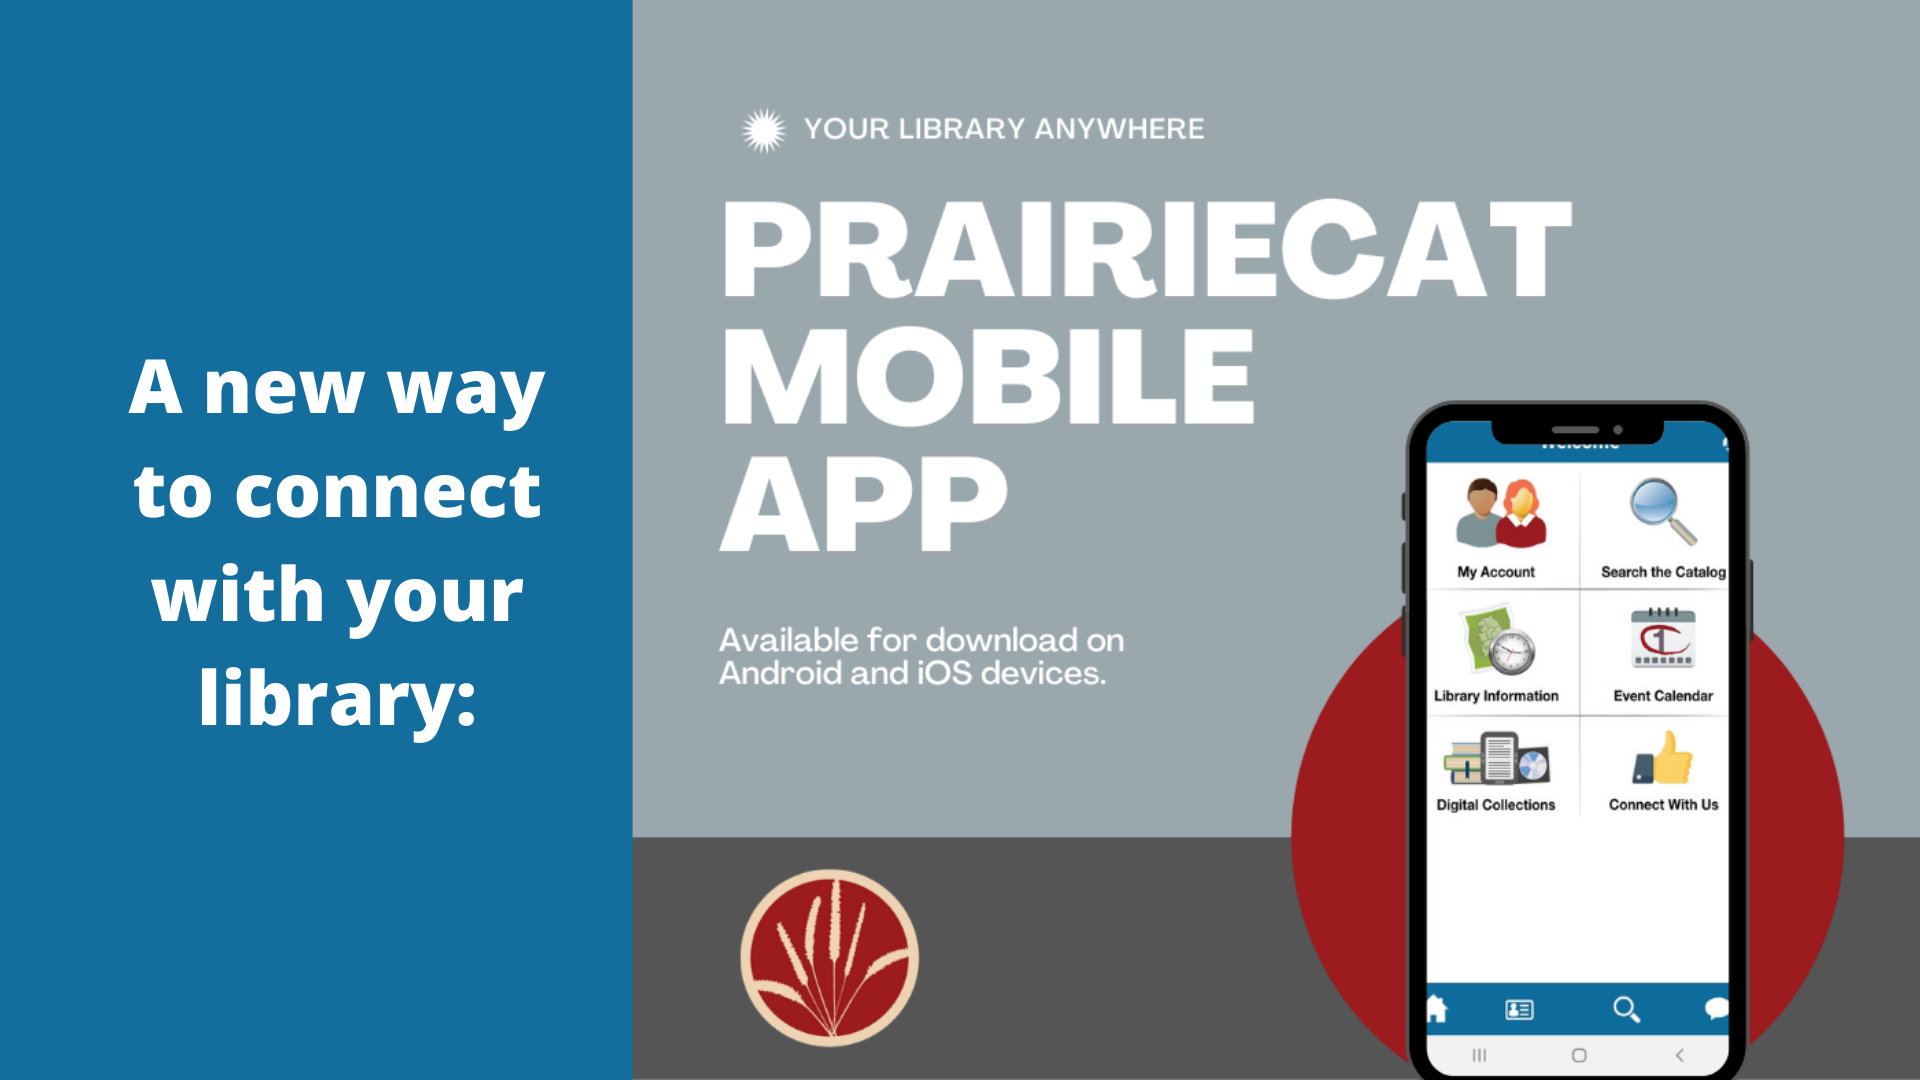 A new way to connect with your library: PrairieCat Mobile App